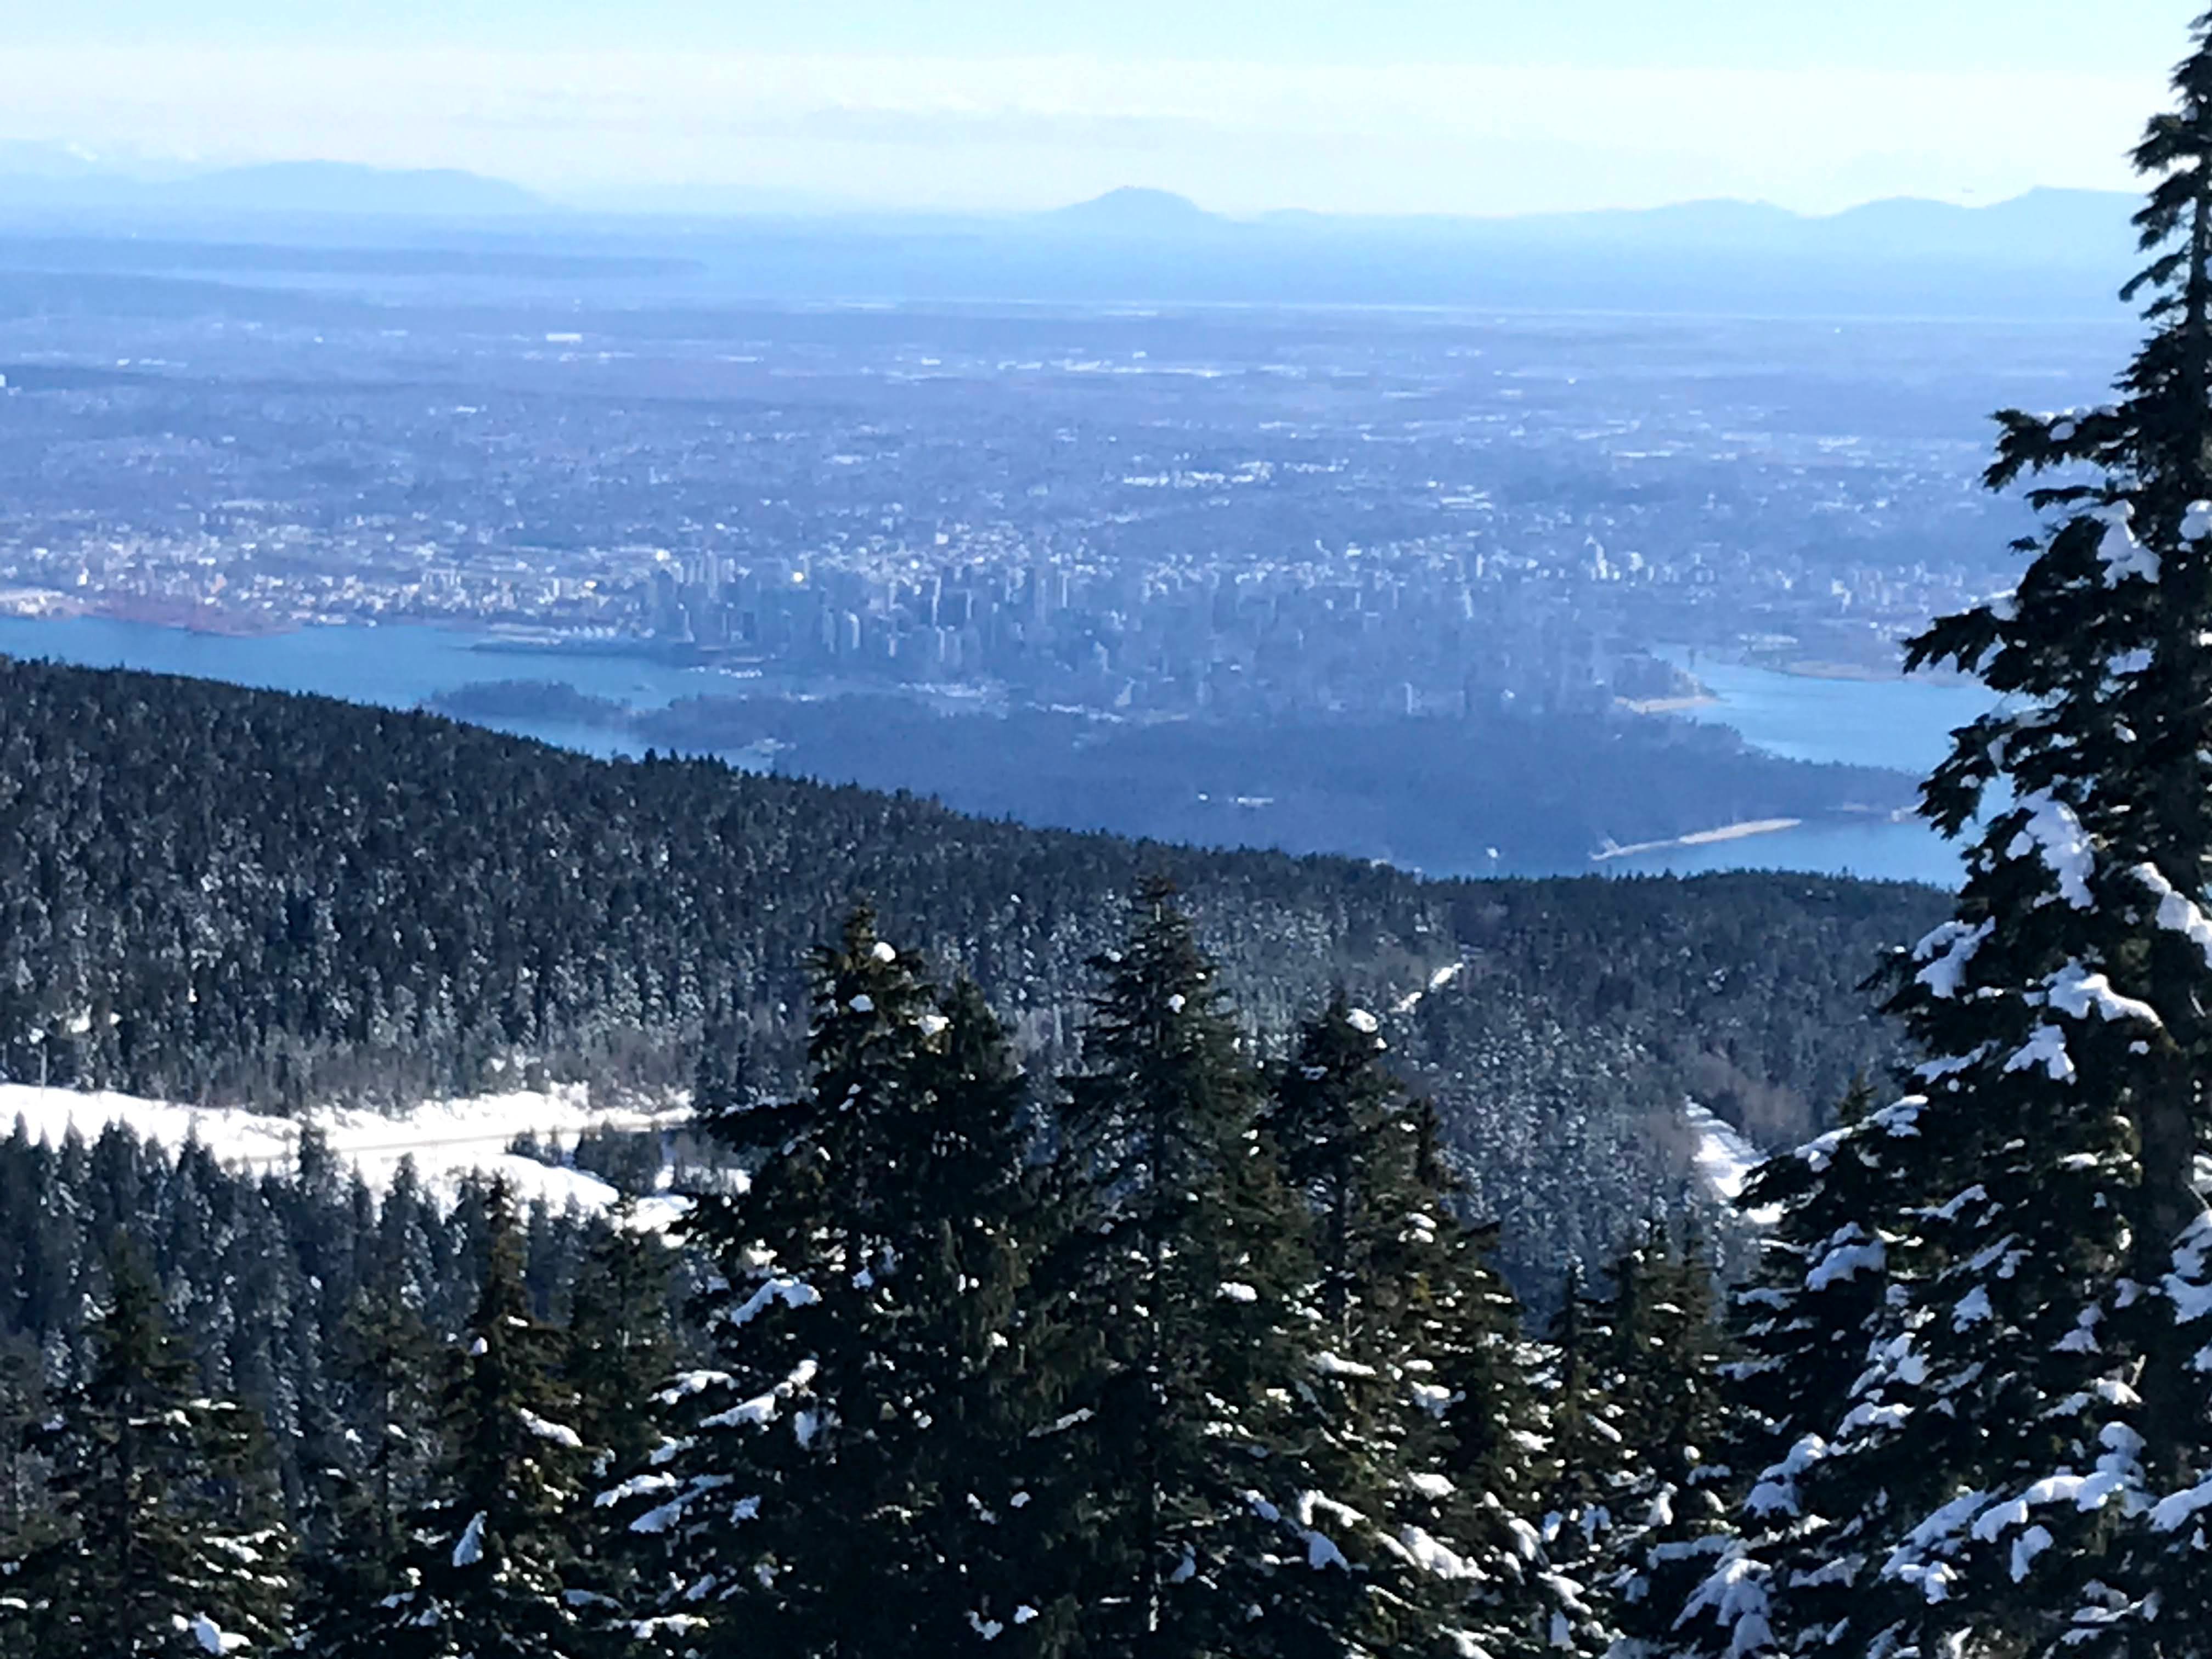 Vancouver from the top, Cypress Mountain